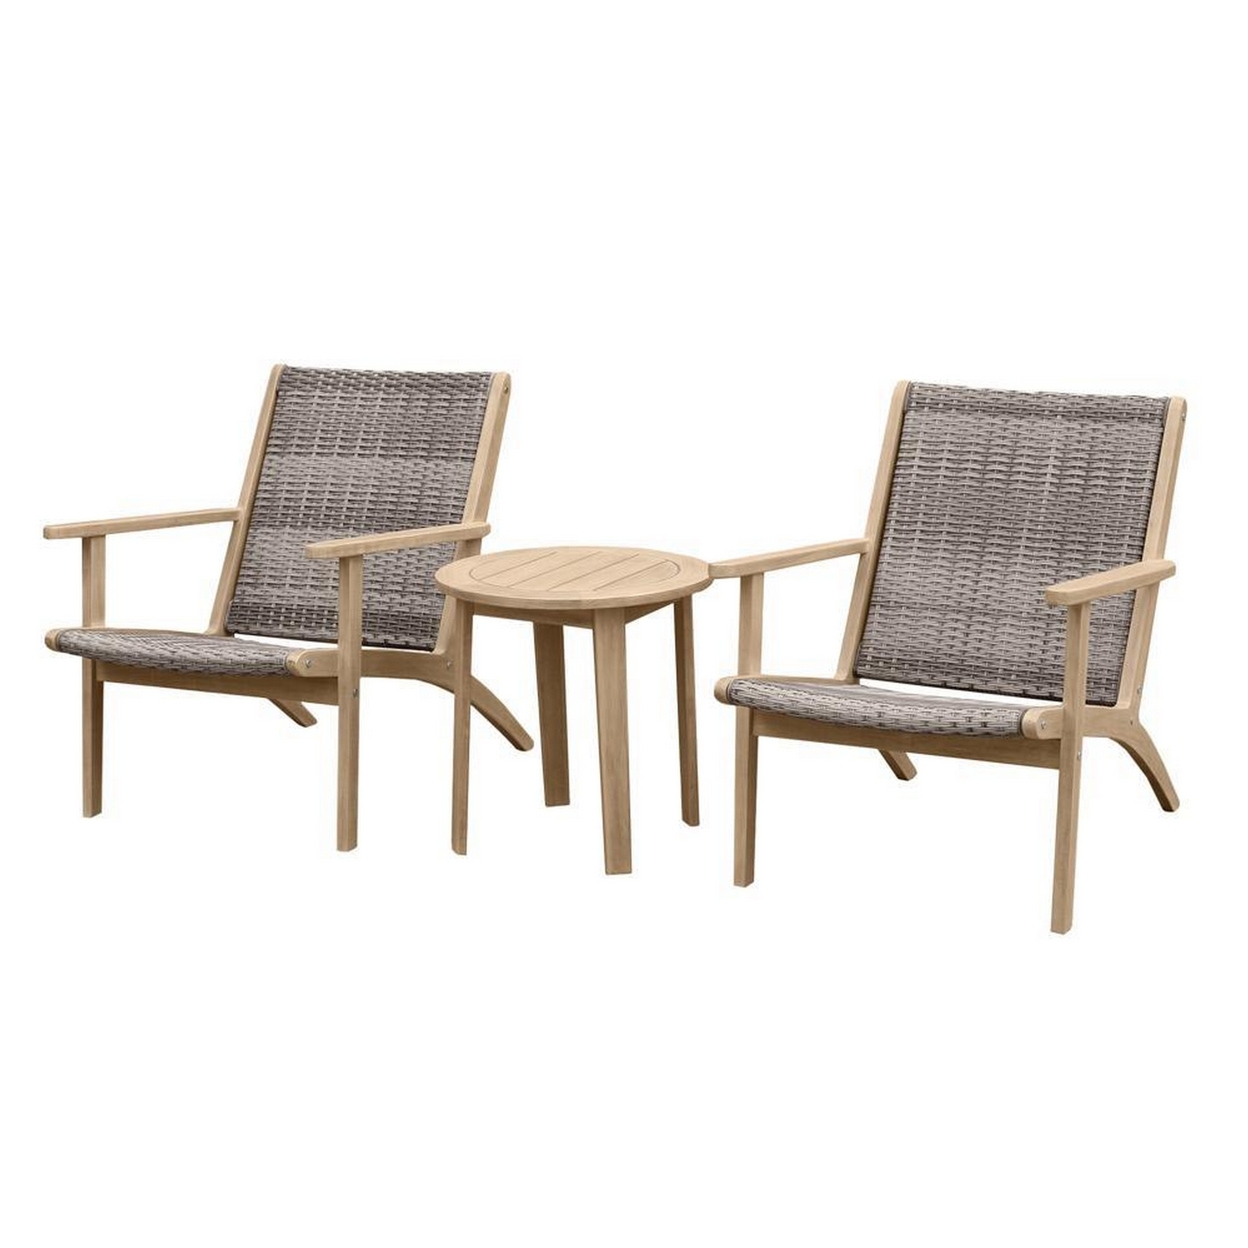 3 Piece Outdoor Set 2 Chairs And End Table, Gray Woven Wicker, Brown Acacia- Saltoro Sherpi